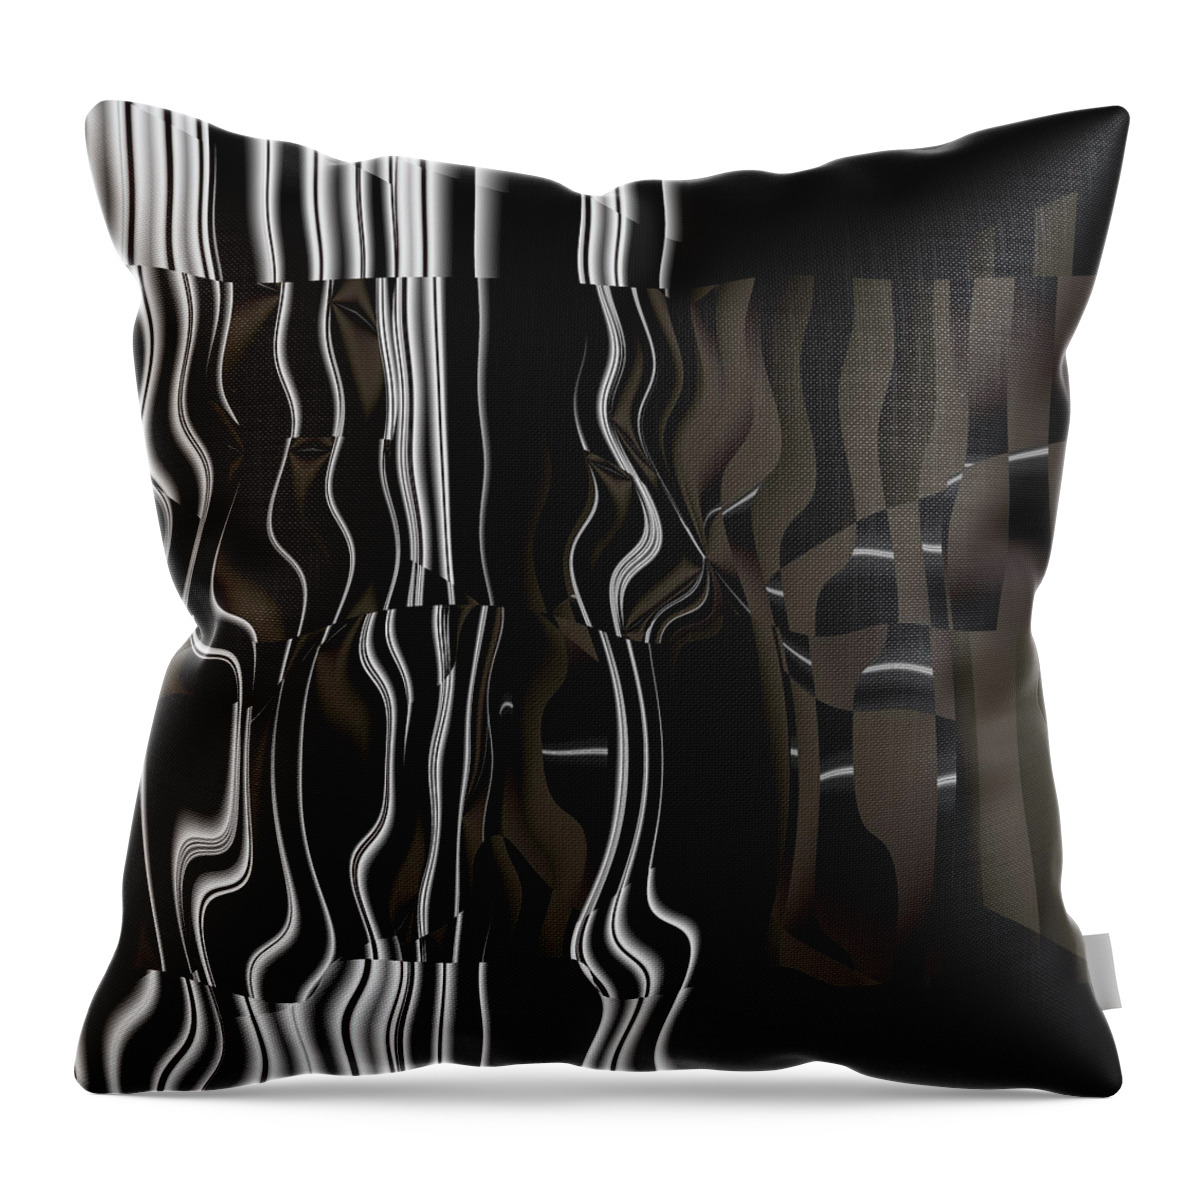 Vic Eberly Throw Pillow featuring the digital art I Miss Your Smile by Vic Eberly